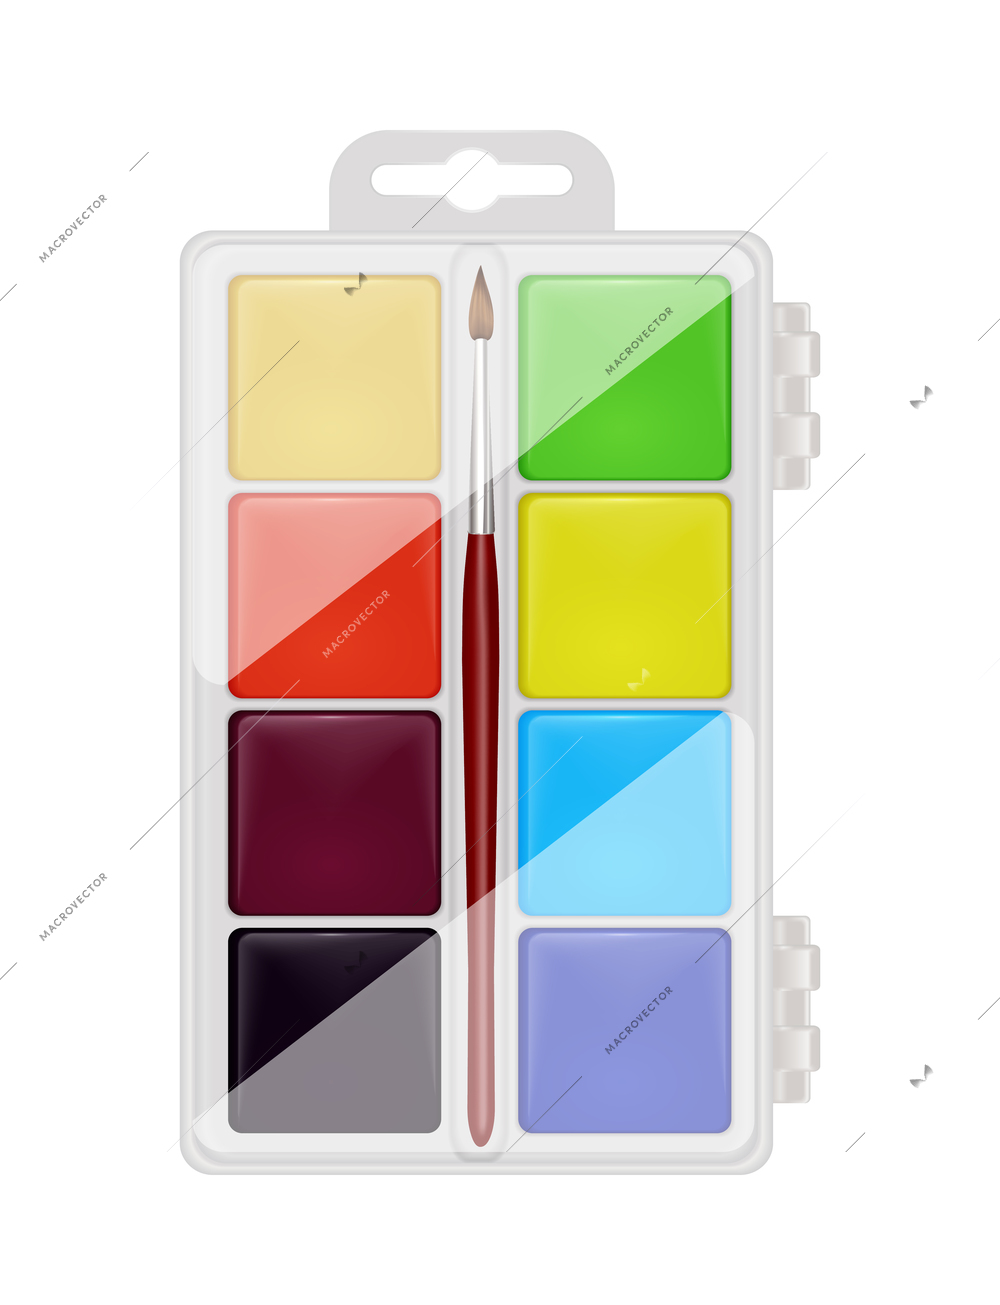 Stationery realistic composition with oil paint set in plastic package box on blank background vector illustration